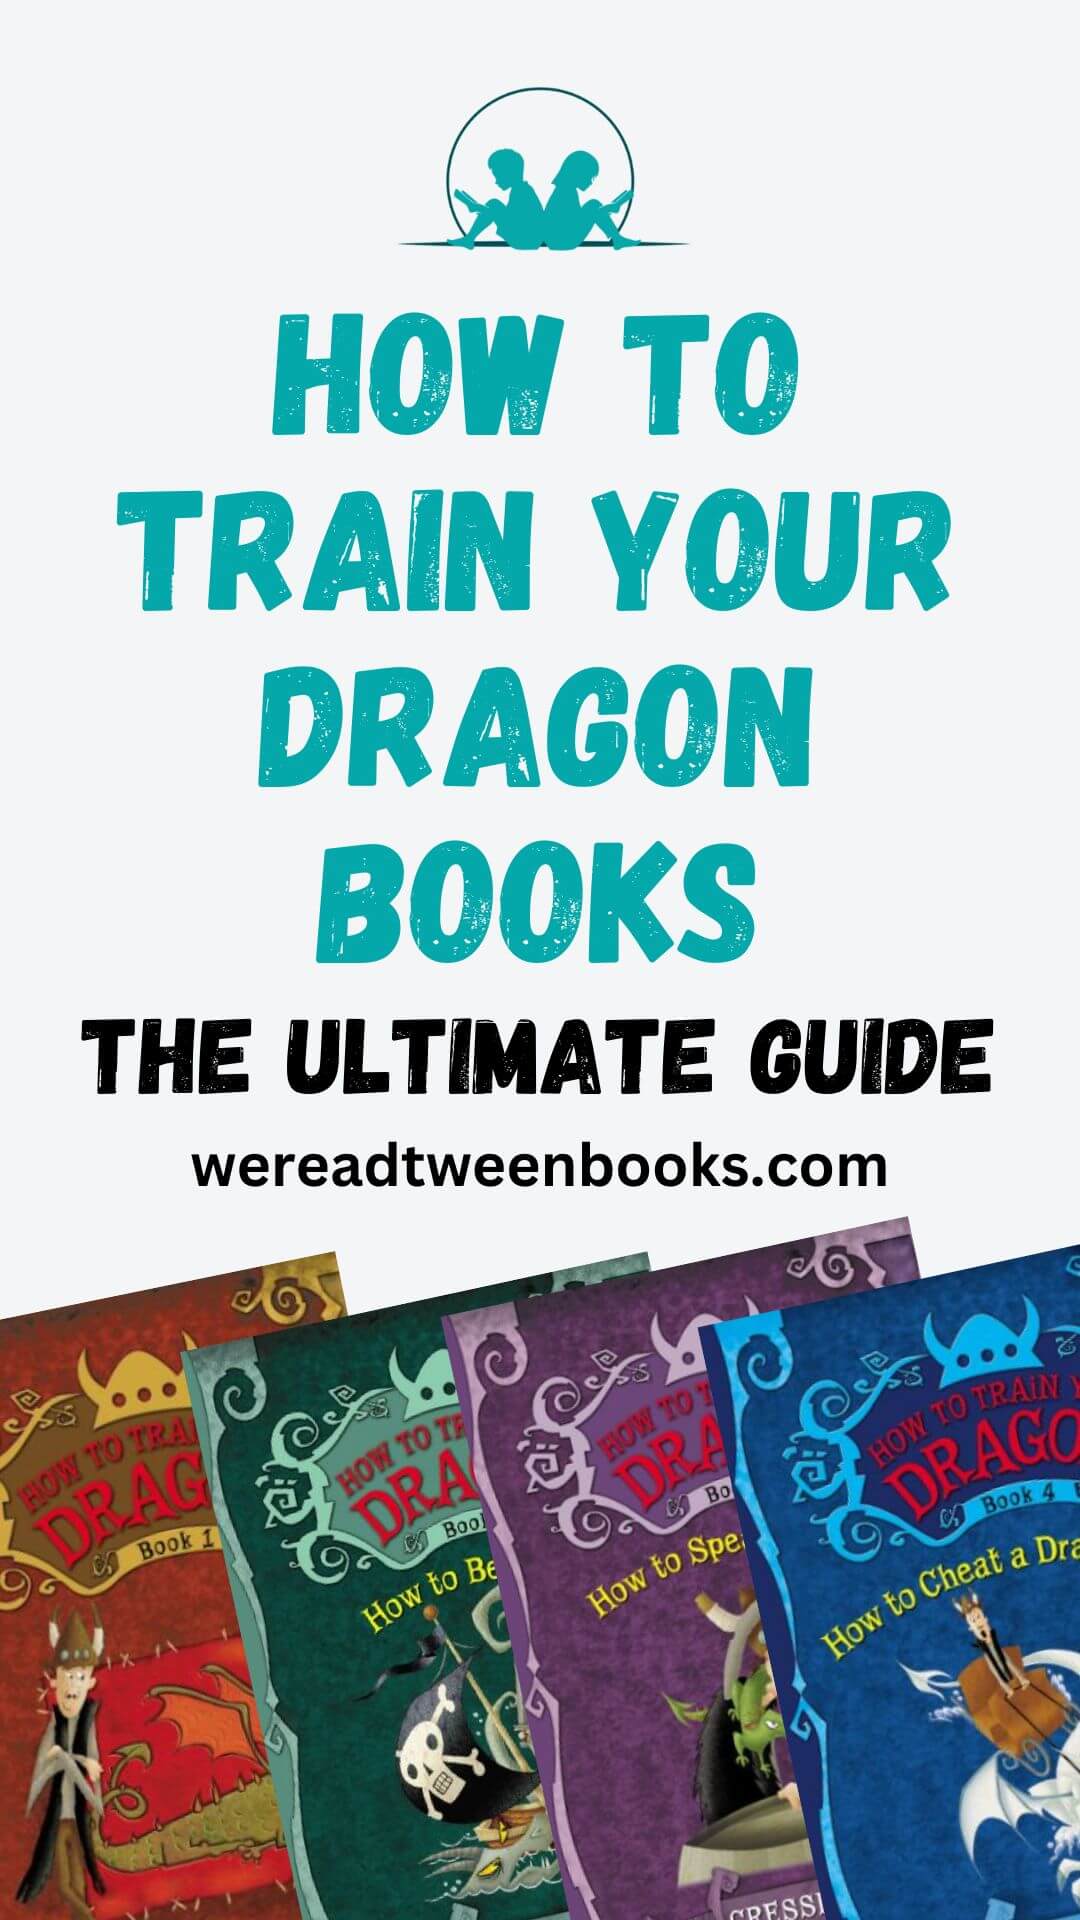 Check out the ultimate guide to the How to Train Your Dragon books in order on We Read Tween Books.